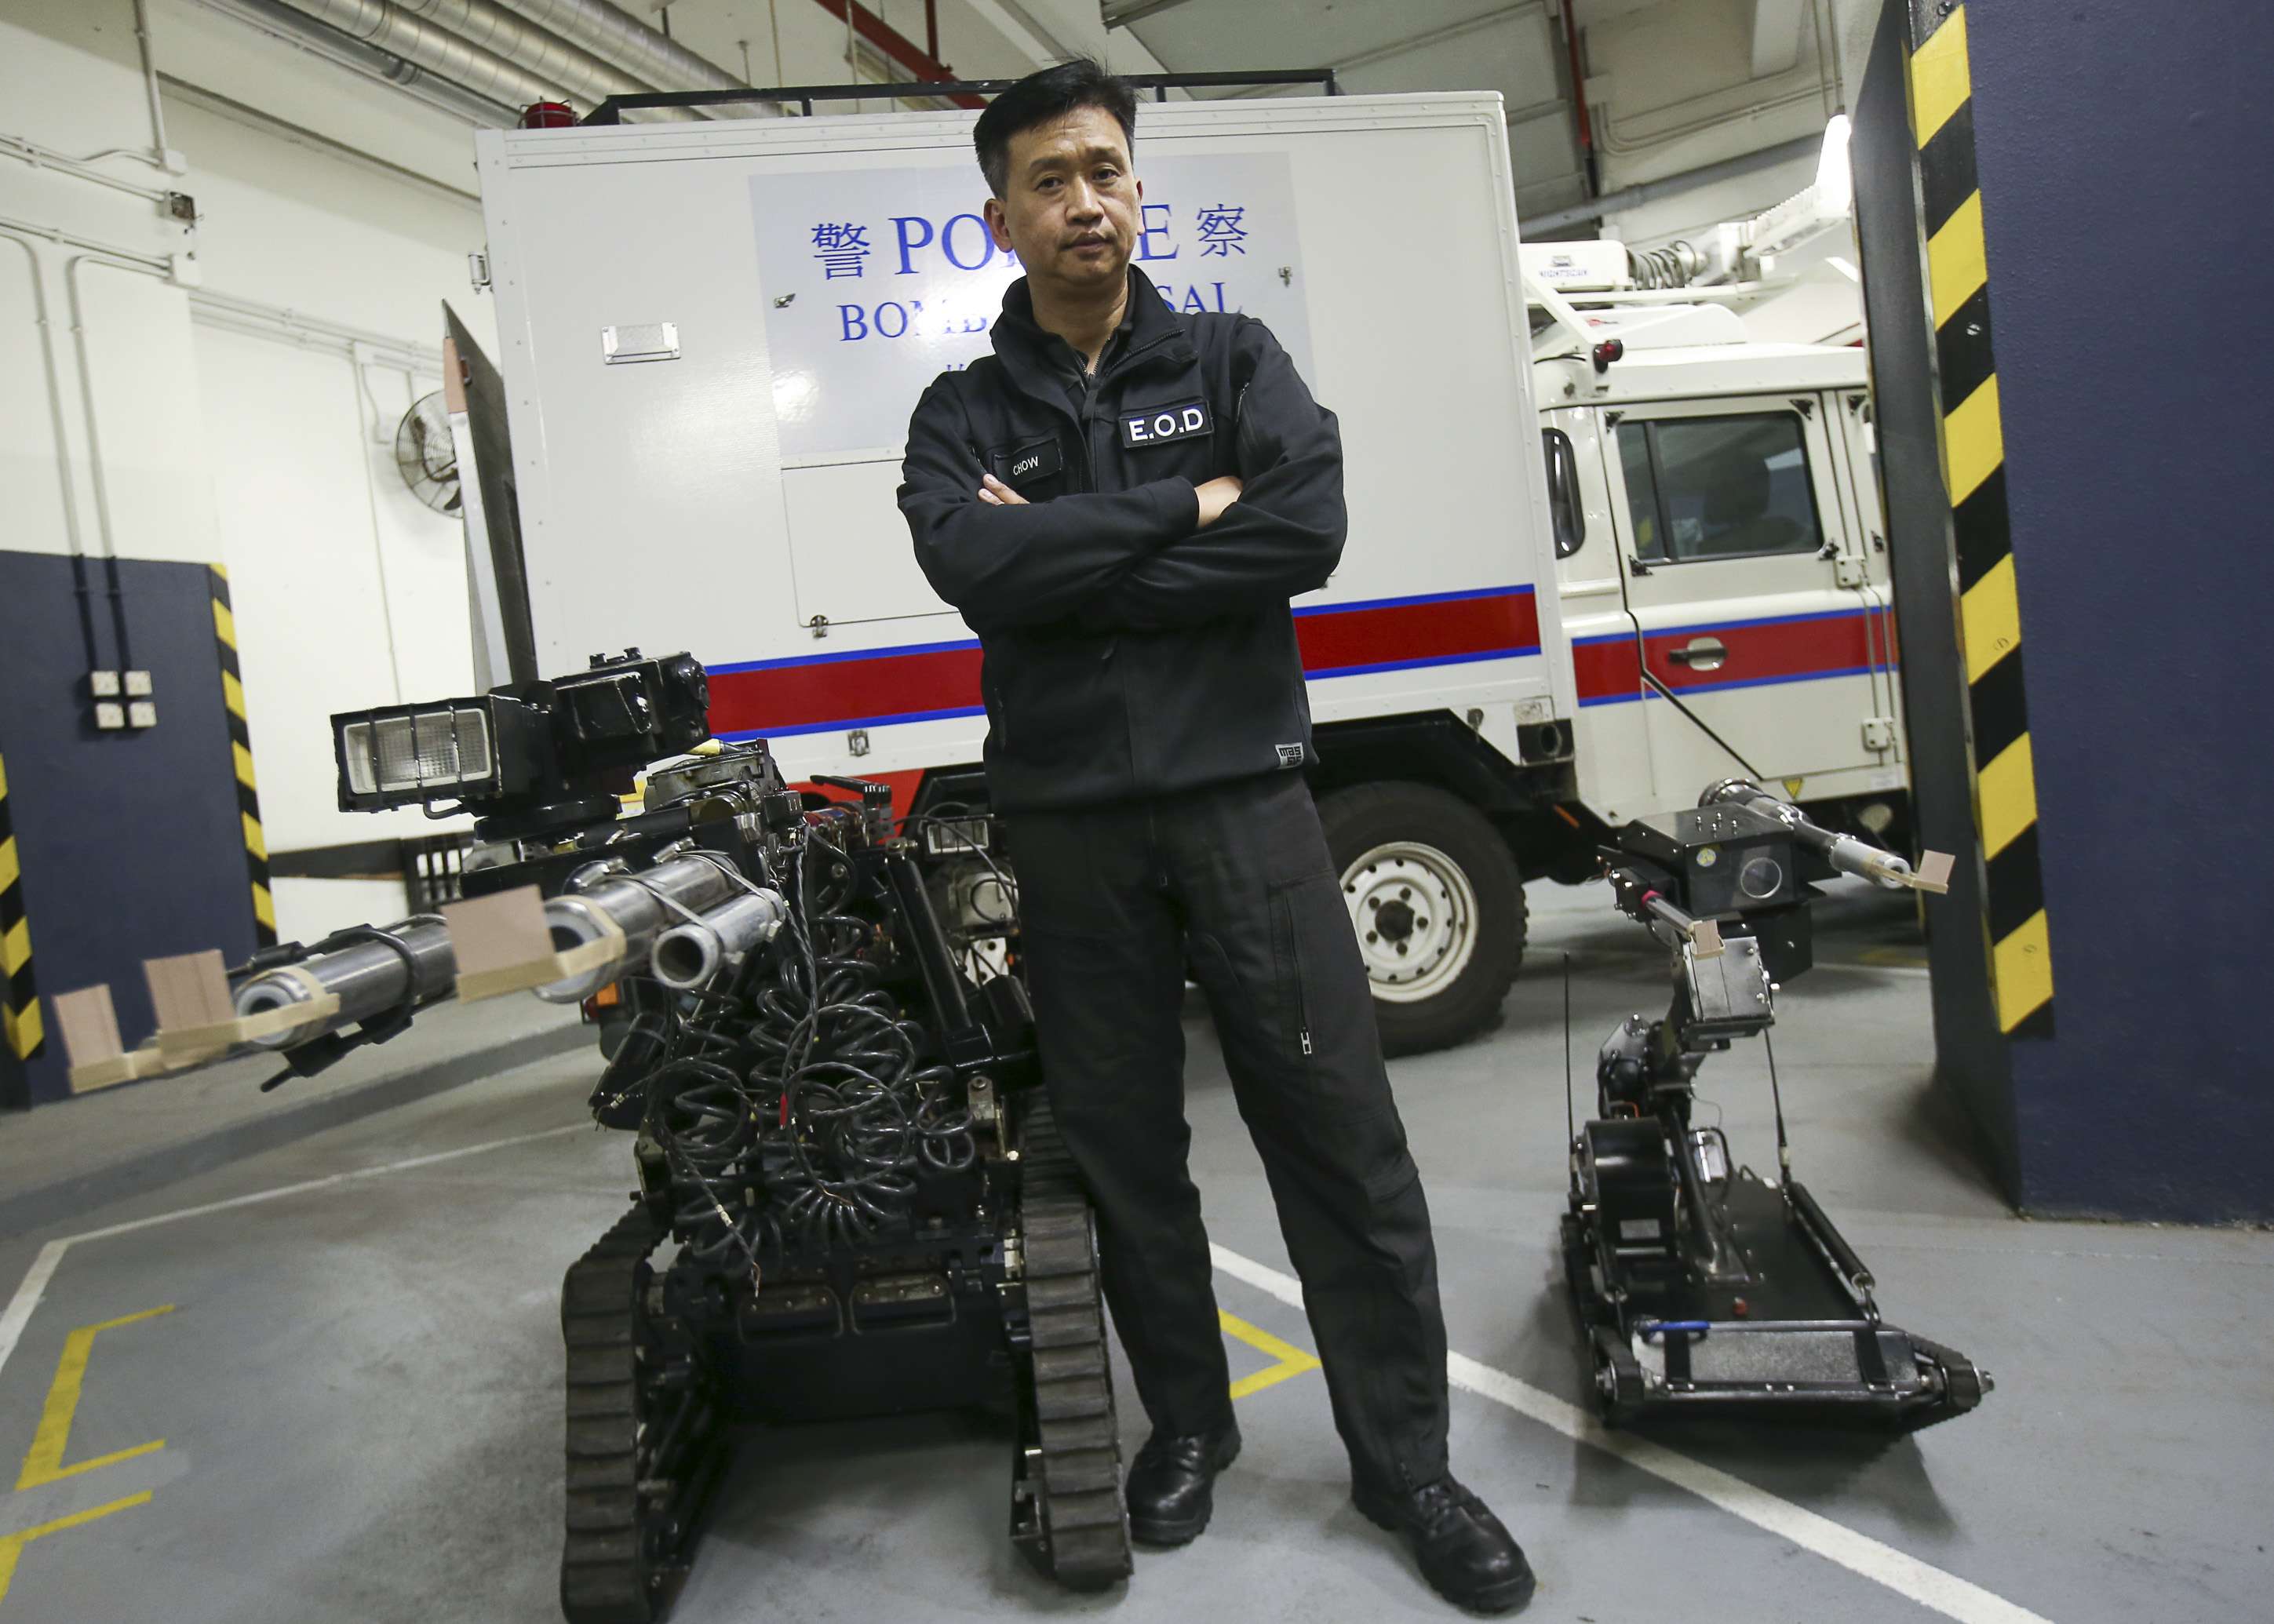 Senior bomb disposal officer Tony Chow poses with some robotic equipment. Photo: David Wong